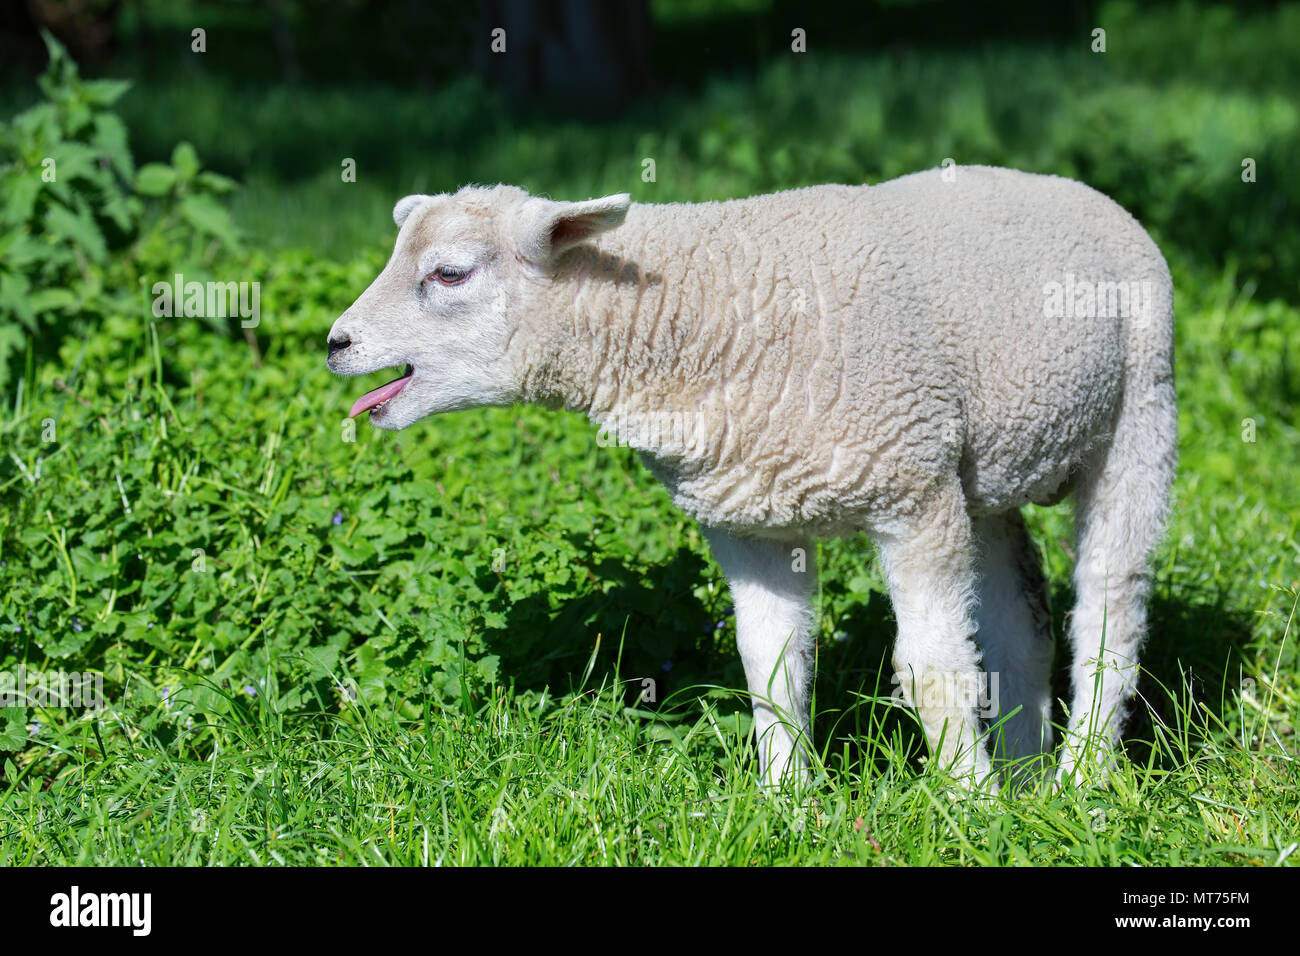 White lamb bleats and calls mother sheep in green grass Stock Photo